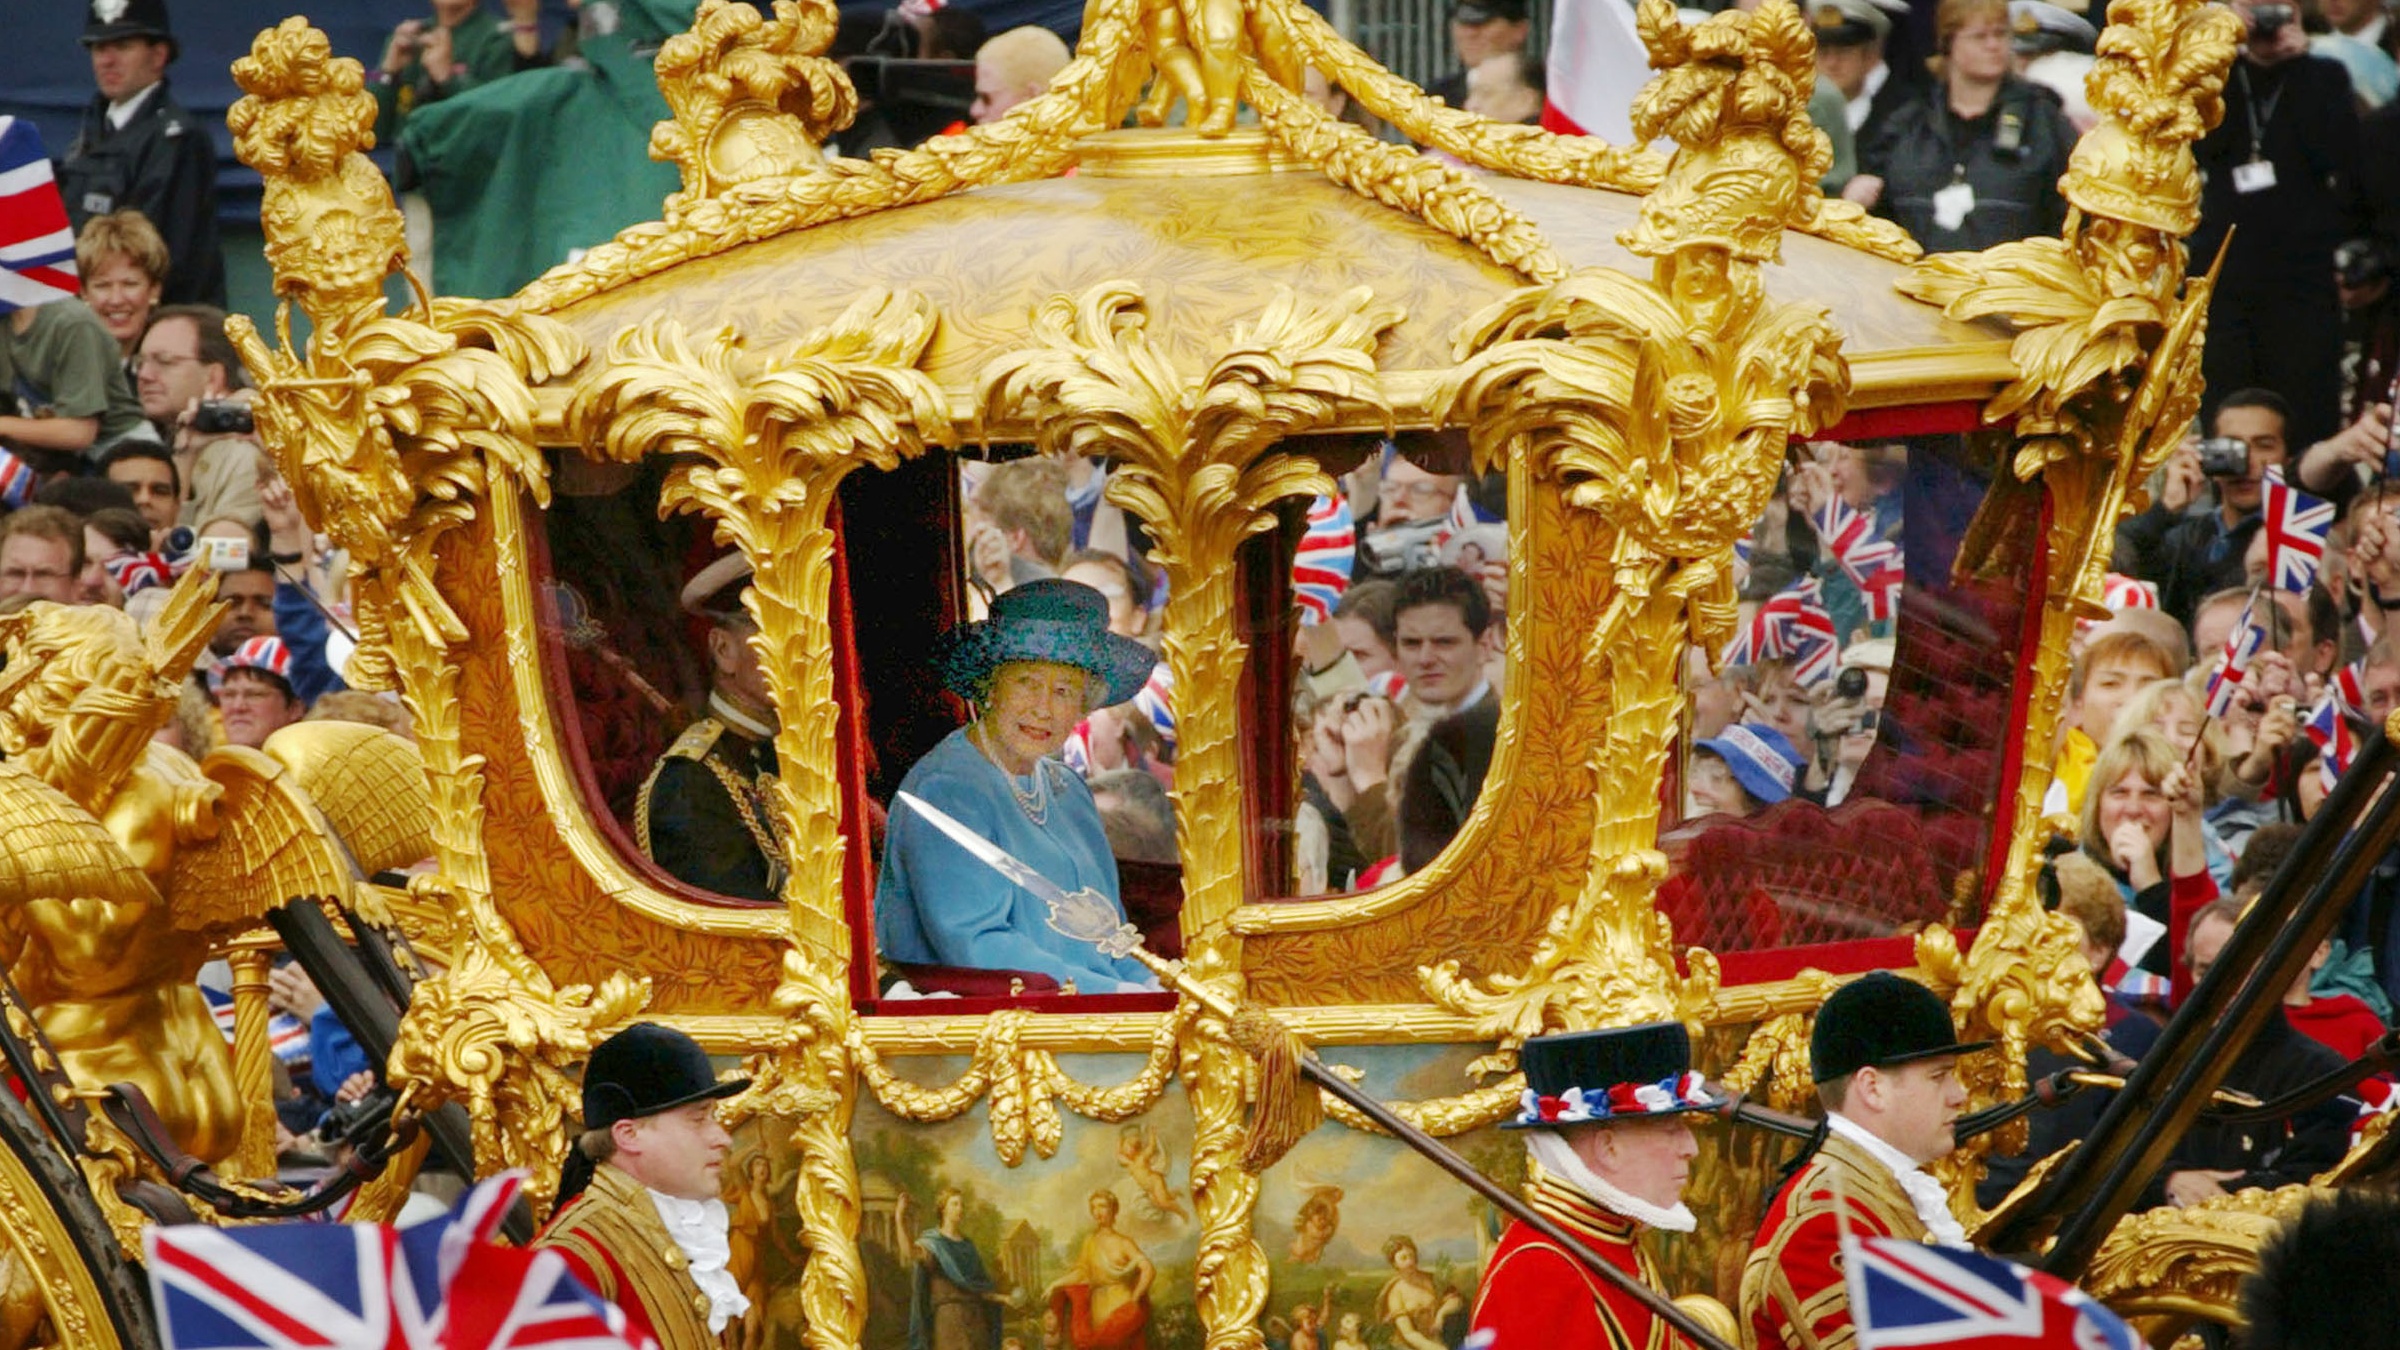 The Queen rides with the Duke of Edinburgh in the Golden State Carriage en route to St Paul’s Cathedral in 2002